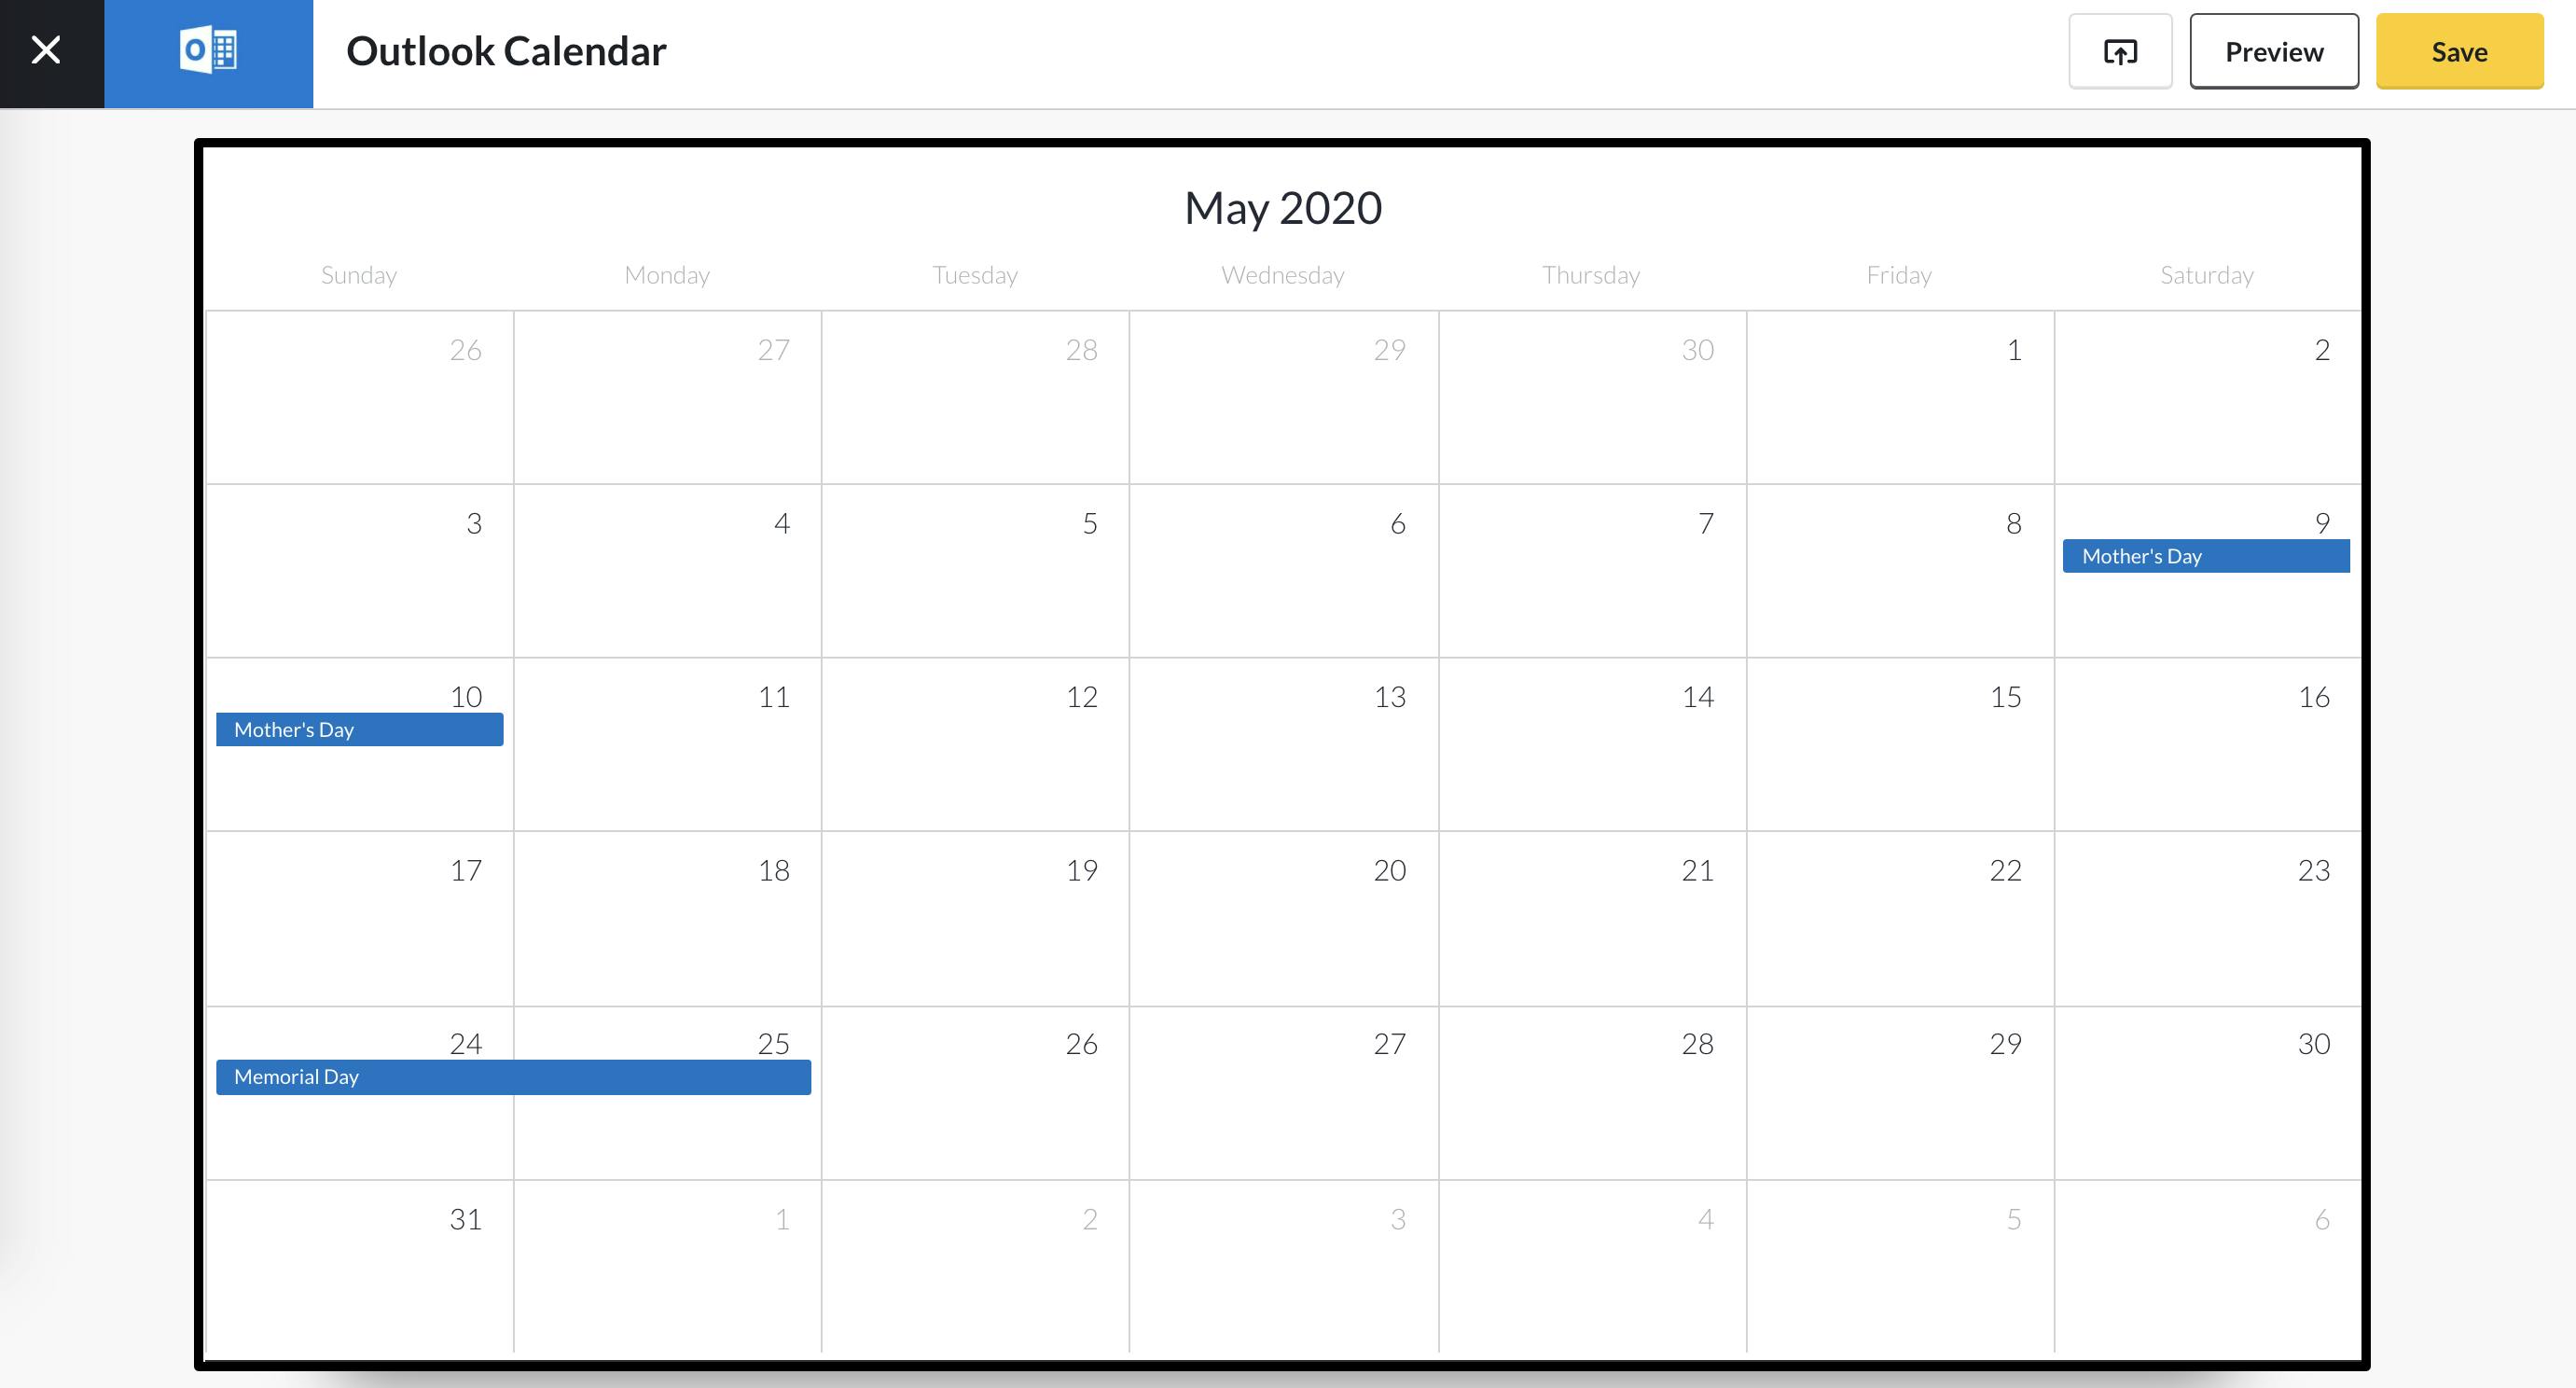 Outlook Calendar App Guide - Preview 5.13.2020.png
